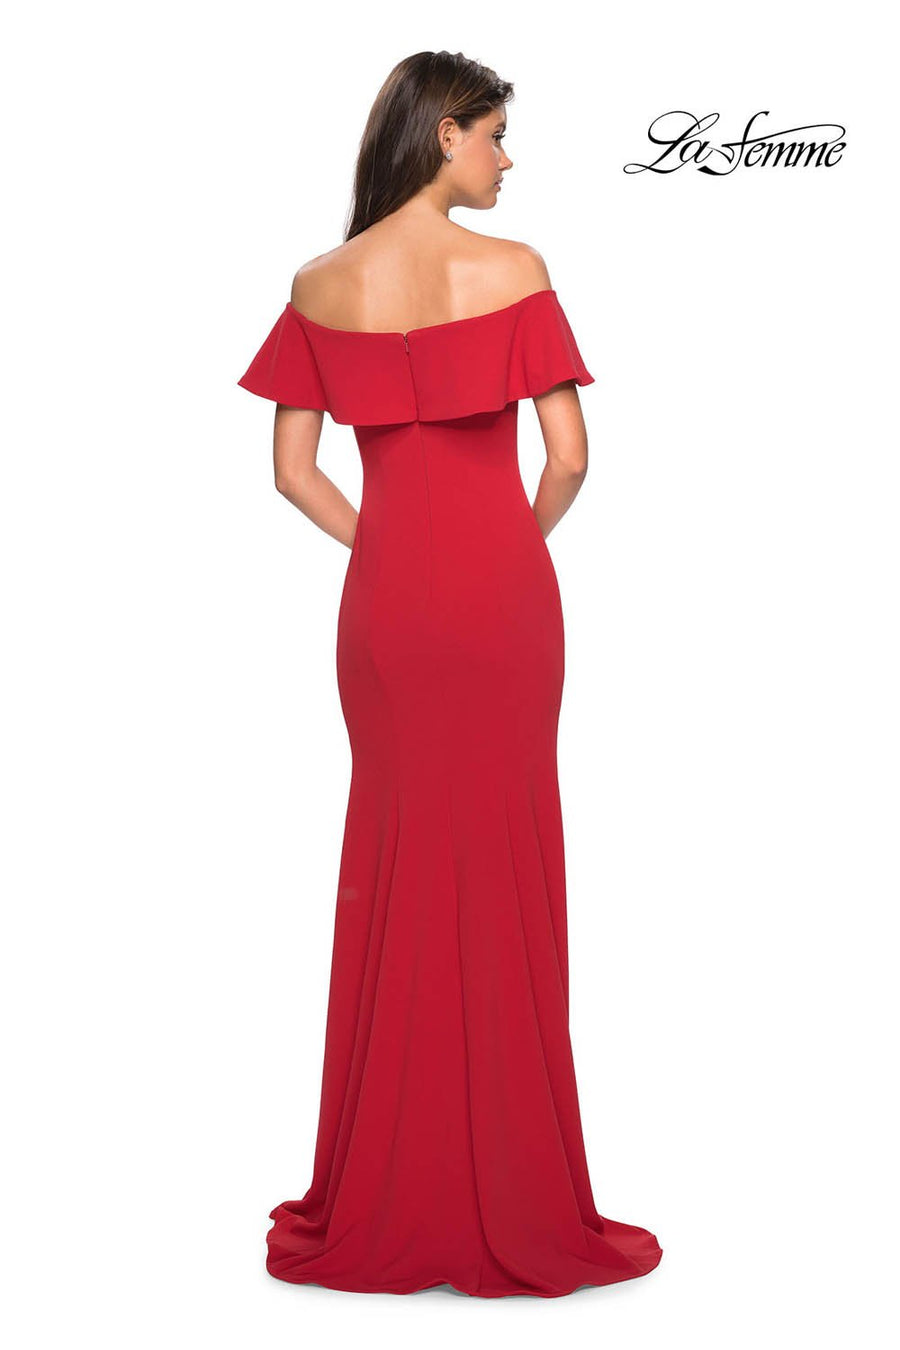 La Femme 27096 prom dress images.  La Femme 27096 is available in these colors: Black, Red, White.